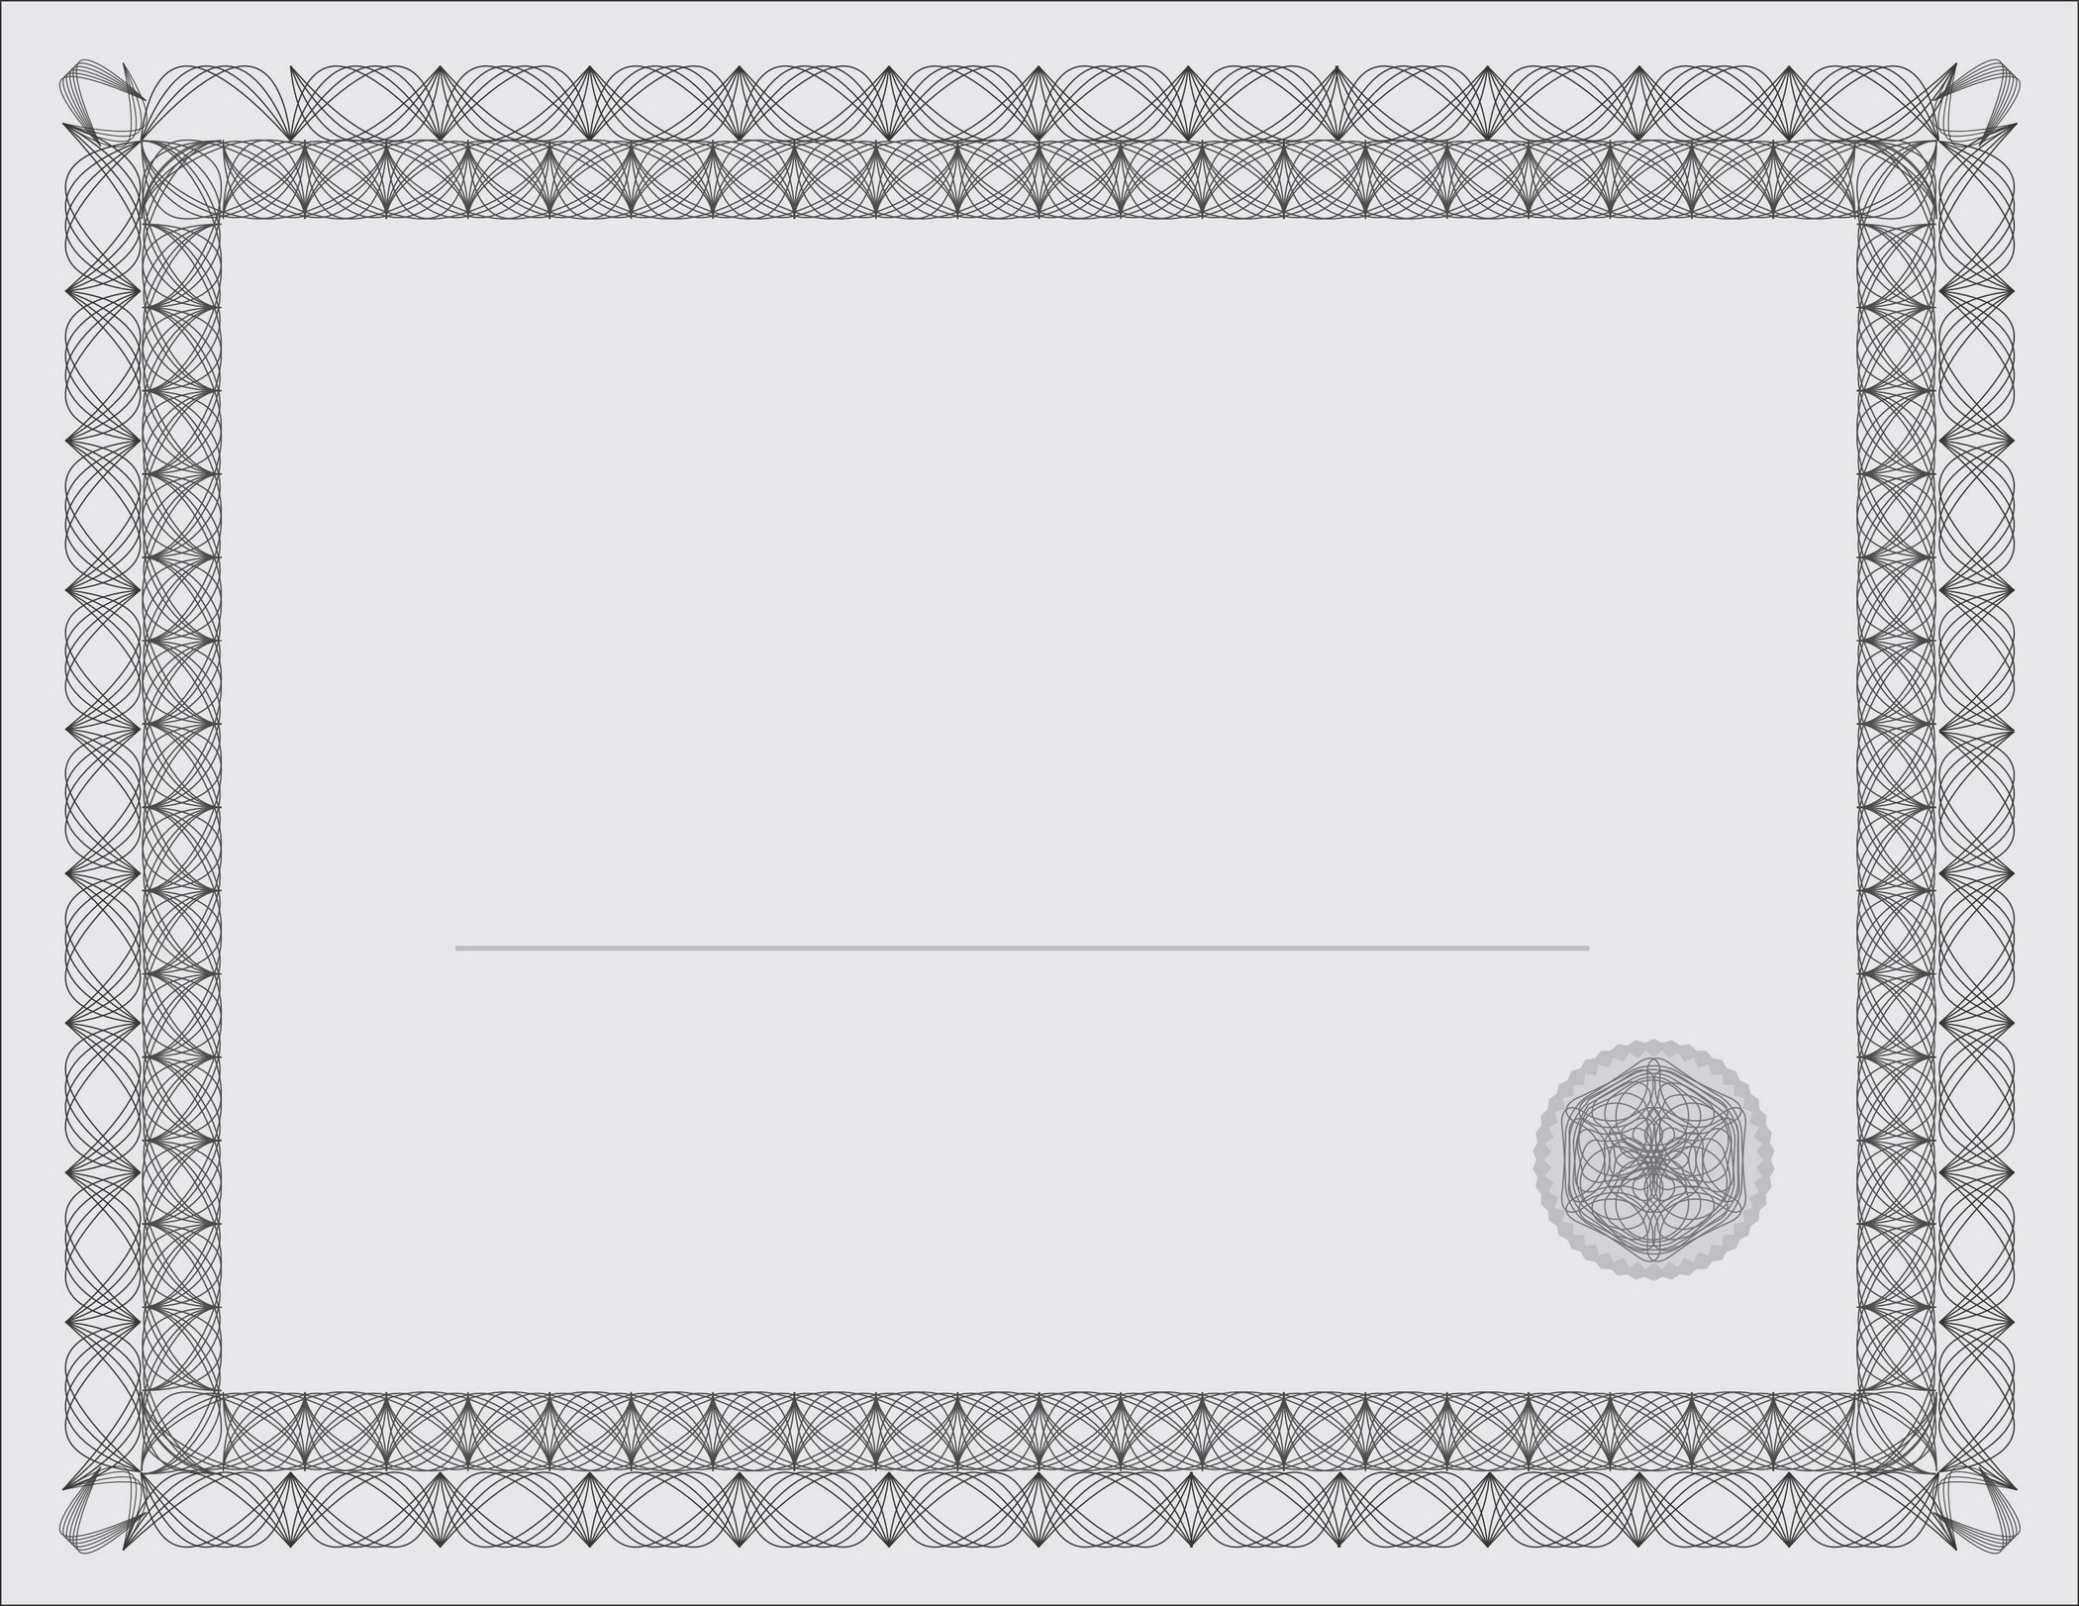 Certificate Border Vector Free Download At Getdrawings | Free Download Inside Borderless Certificate Templates